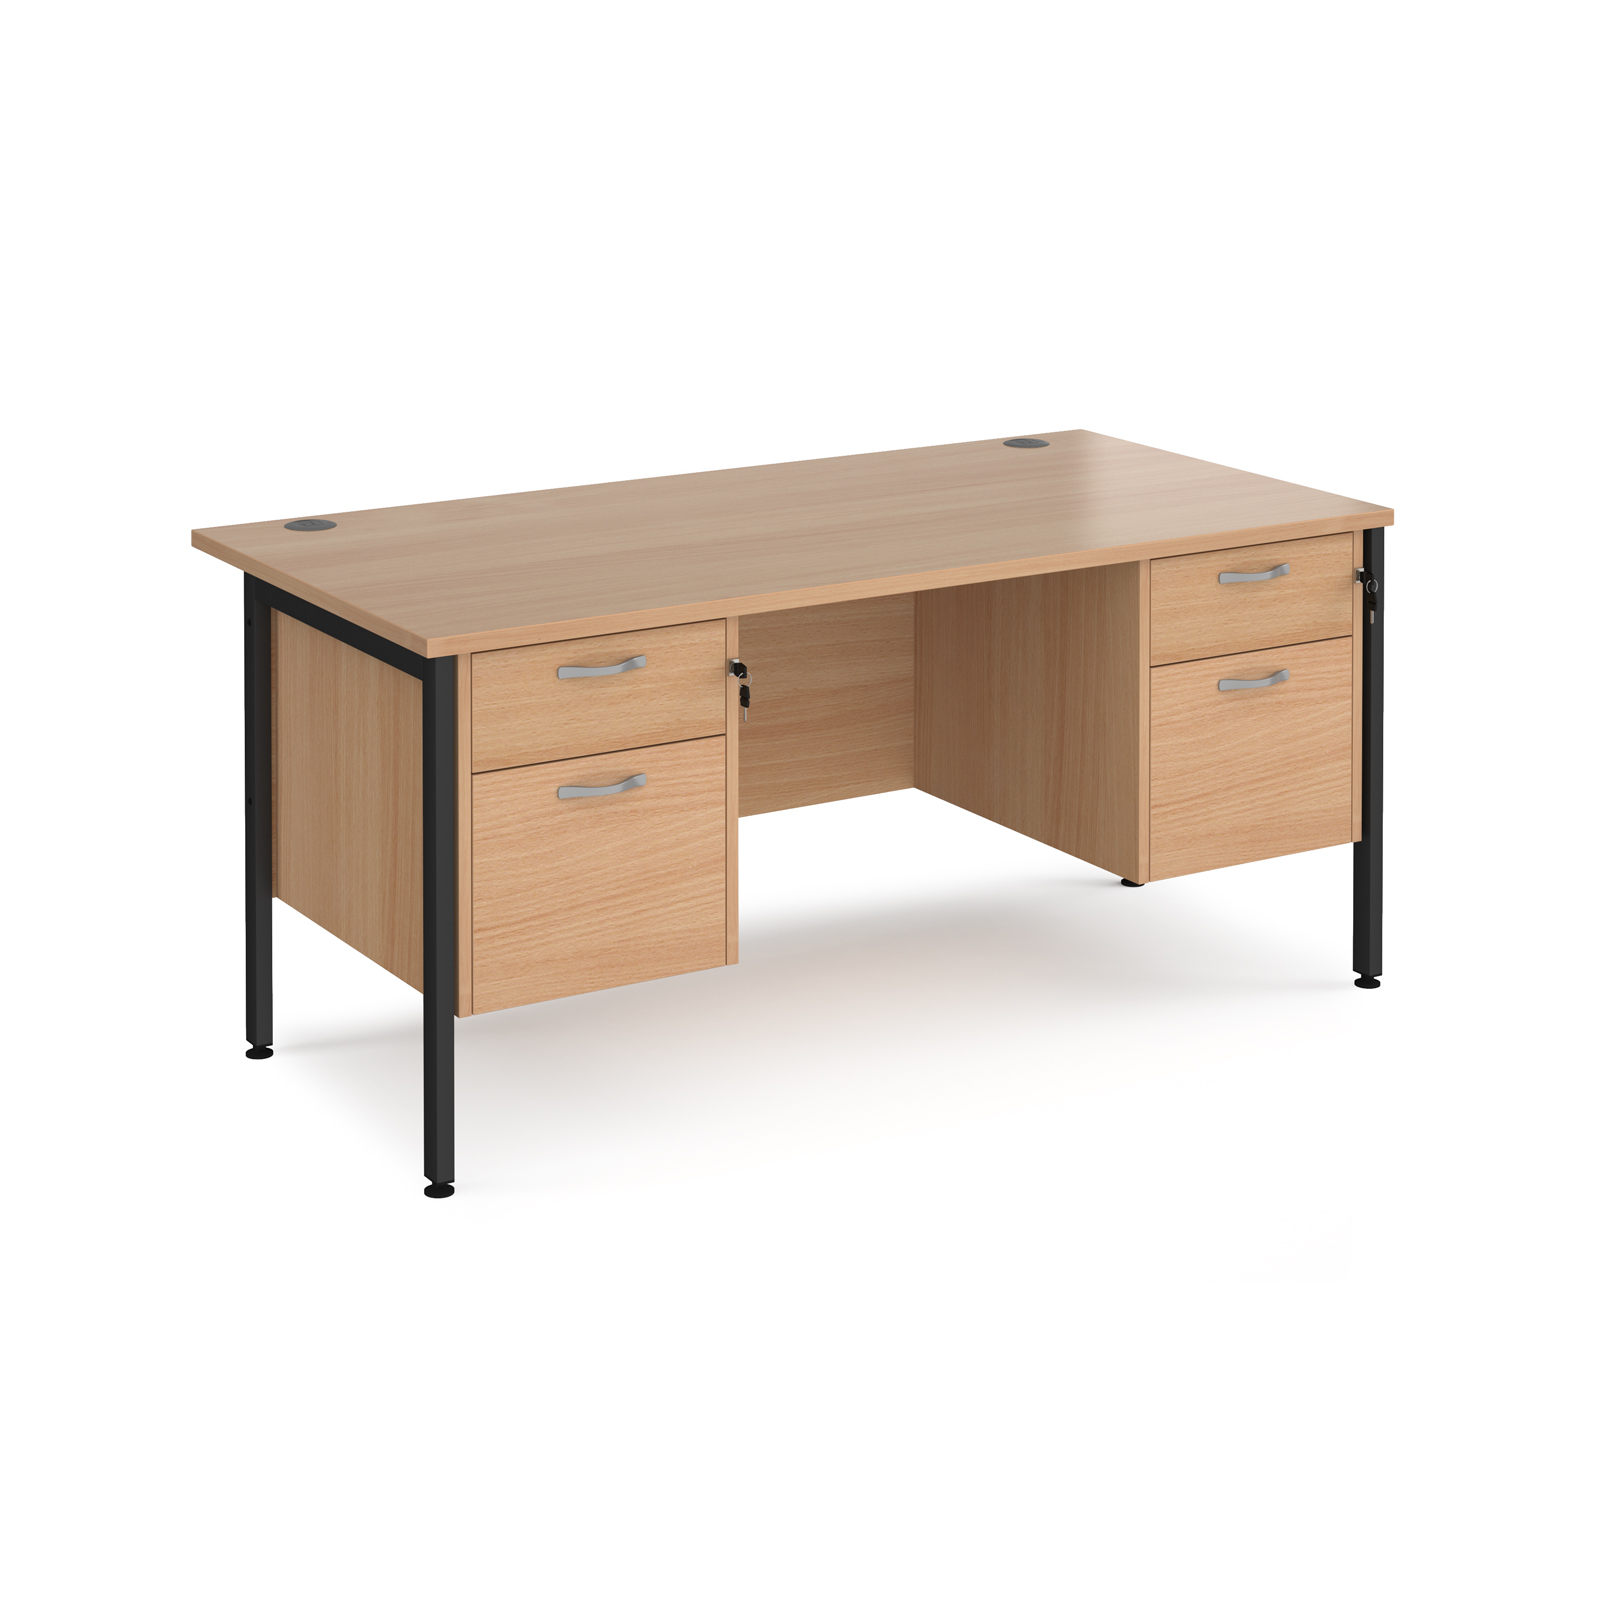 Maestro 25 straight desk 1600mm x 800mm with two x 2 drawer pedestals - black H-frame leg, beech top